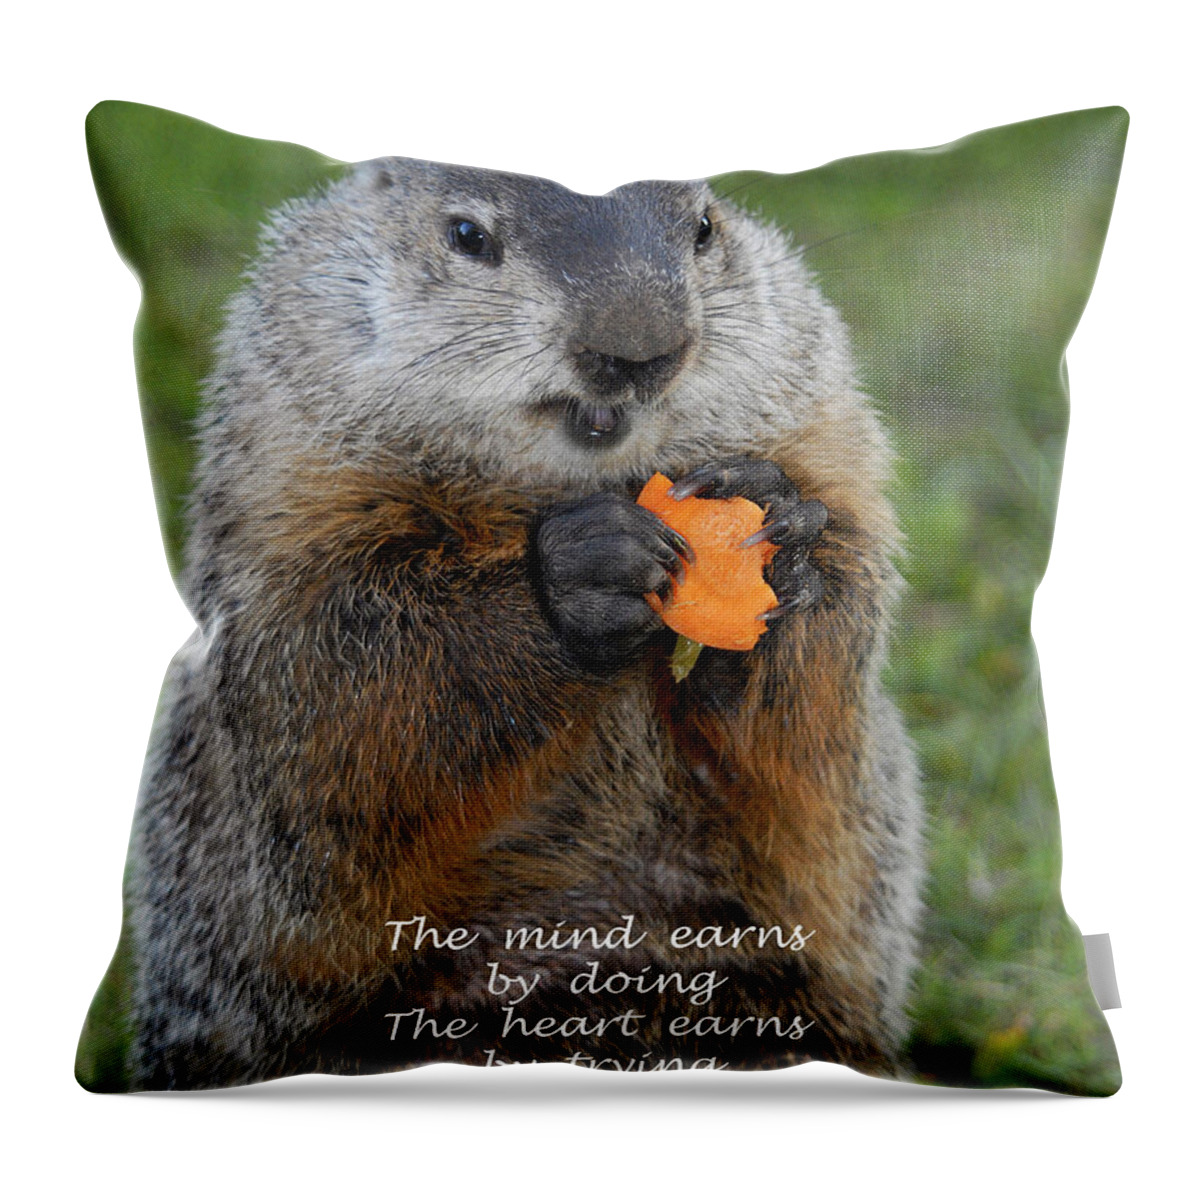 Sayings Throw Pillow featuring the photograph The heart earns by trying by Paul W Faust - Impressions of Light